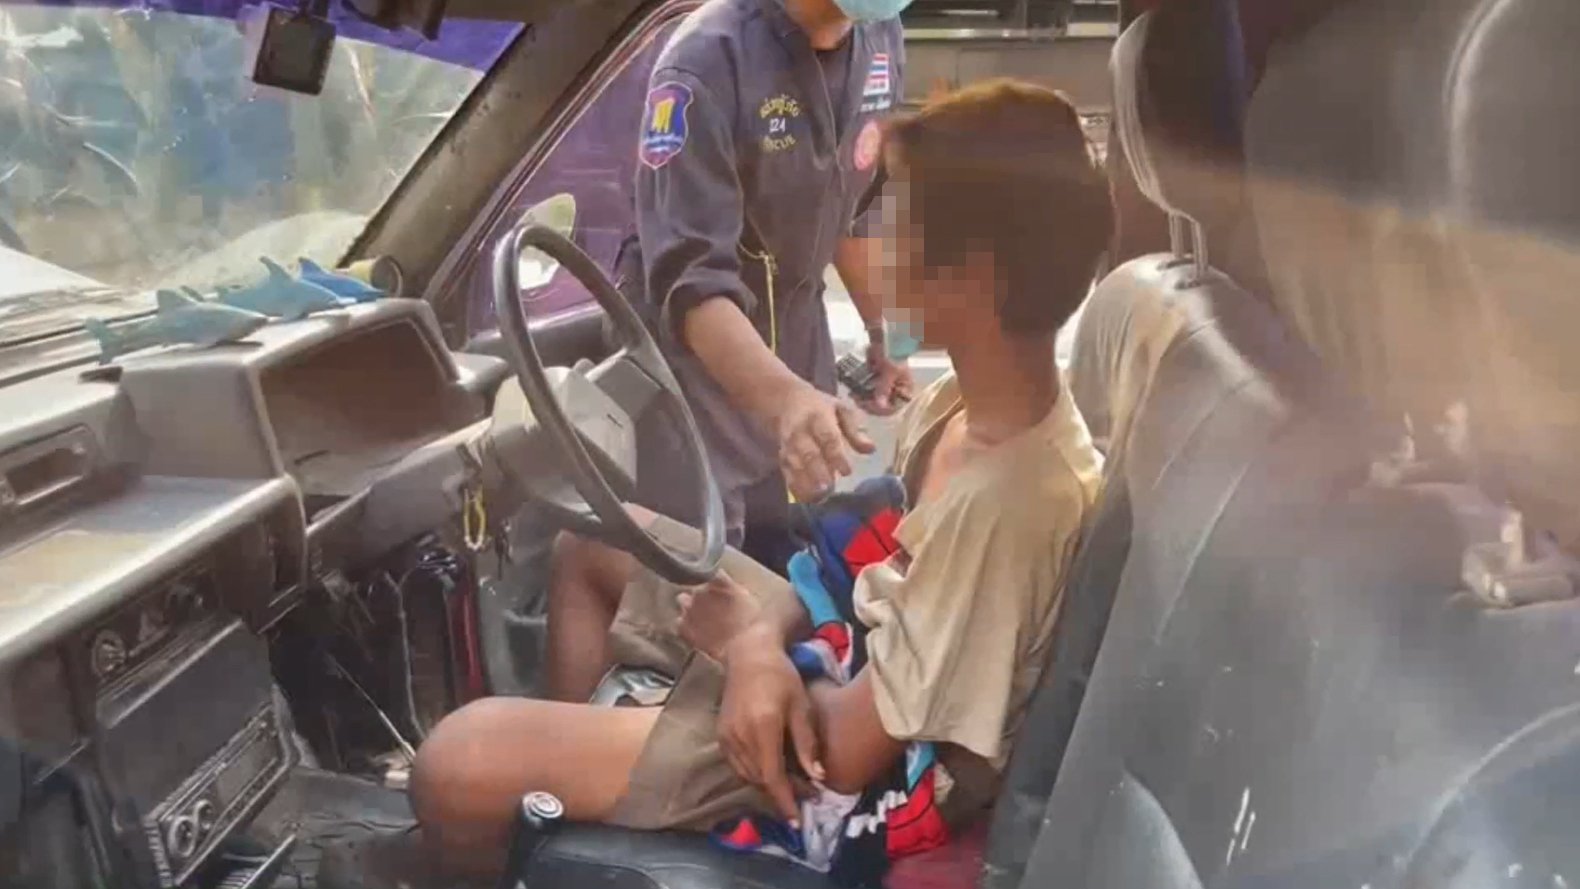 11-Year-Old Steals Cars Across Thailand, Left Poop In A Pick-Up Truck Before Getting Caught